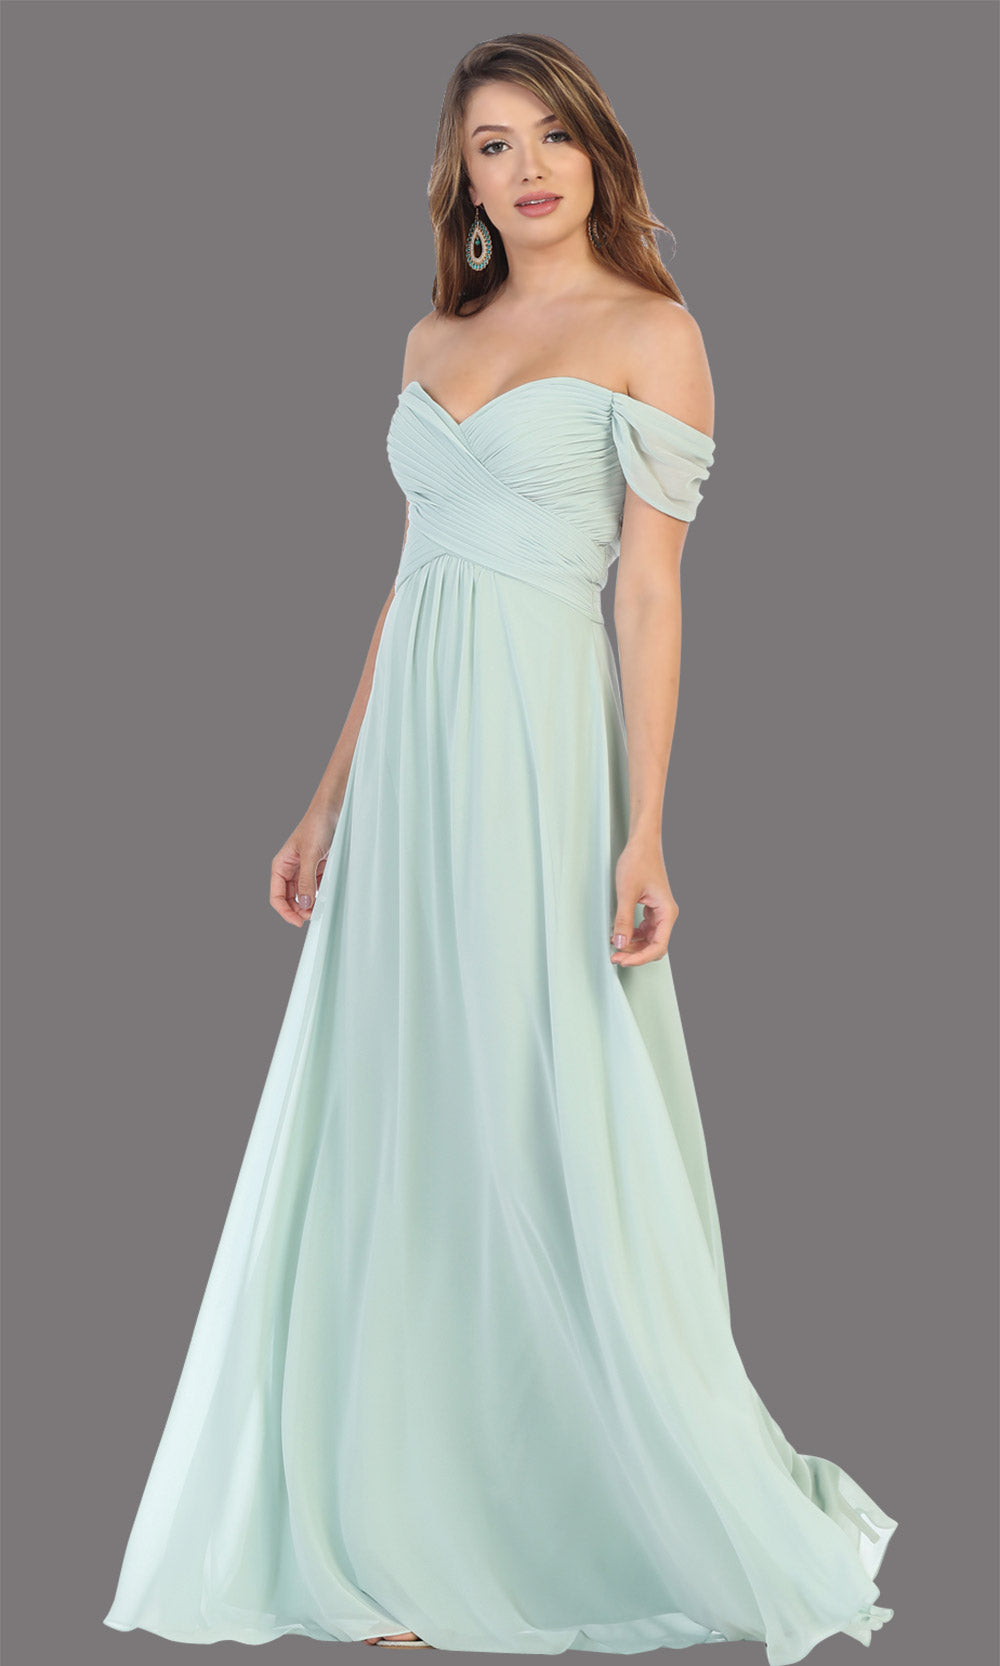 Mayqueen MQ1711 long sage green flowy off shoulder dress. This light green dress is perfect for bridesmaid dresses, simple wedding guest dress, prom dress, gala, black tie wedding. Plus sizes are available, evening party dress.jpg